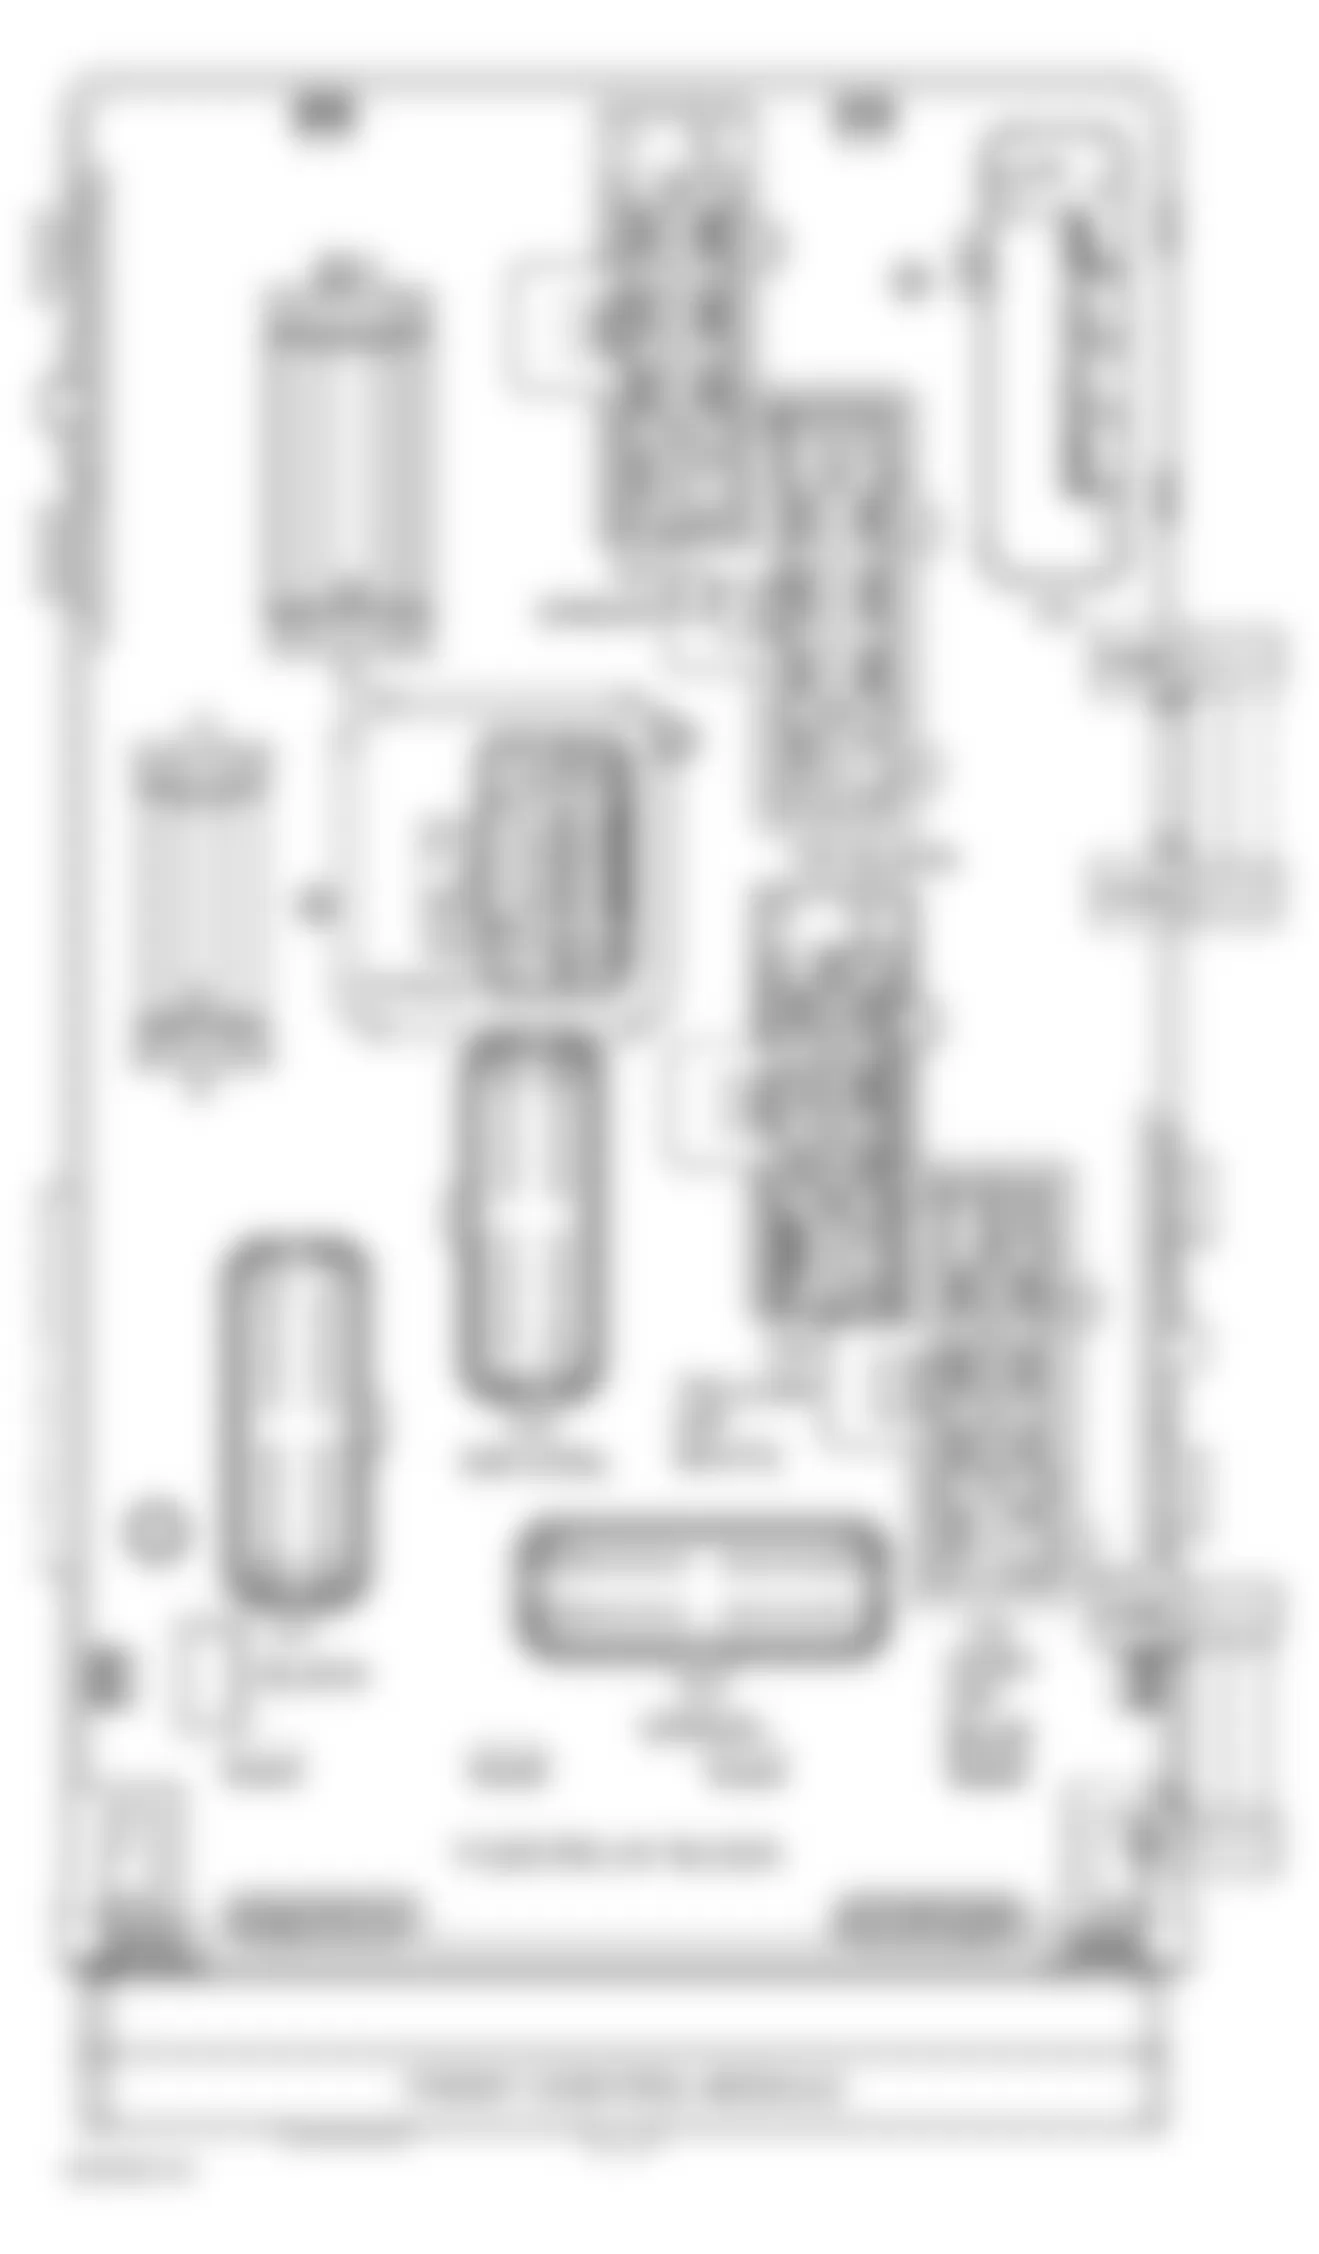 Chrysler Town & Country EX 2001 - Component Locations -  Identifying Fuse & Relay Center (2 Of 2)